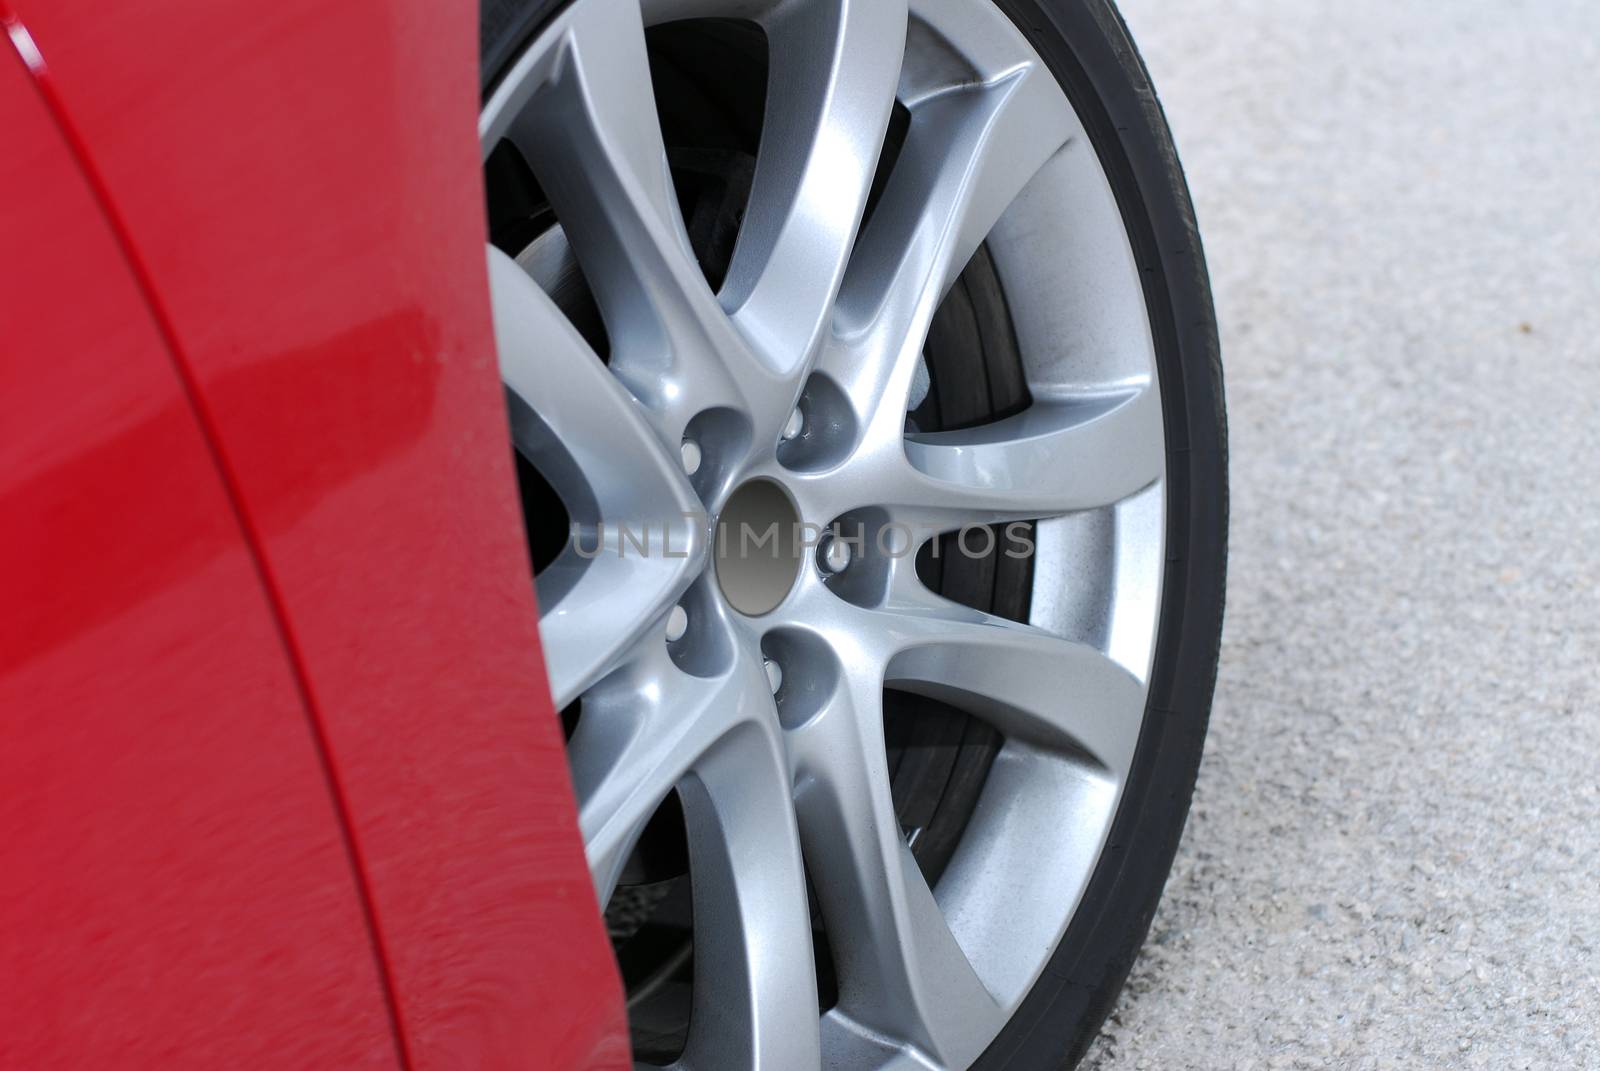 tire and alloy wheel on this high performance sports car